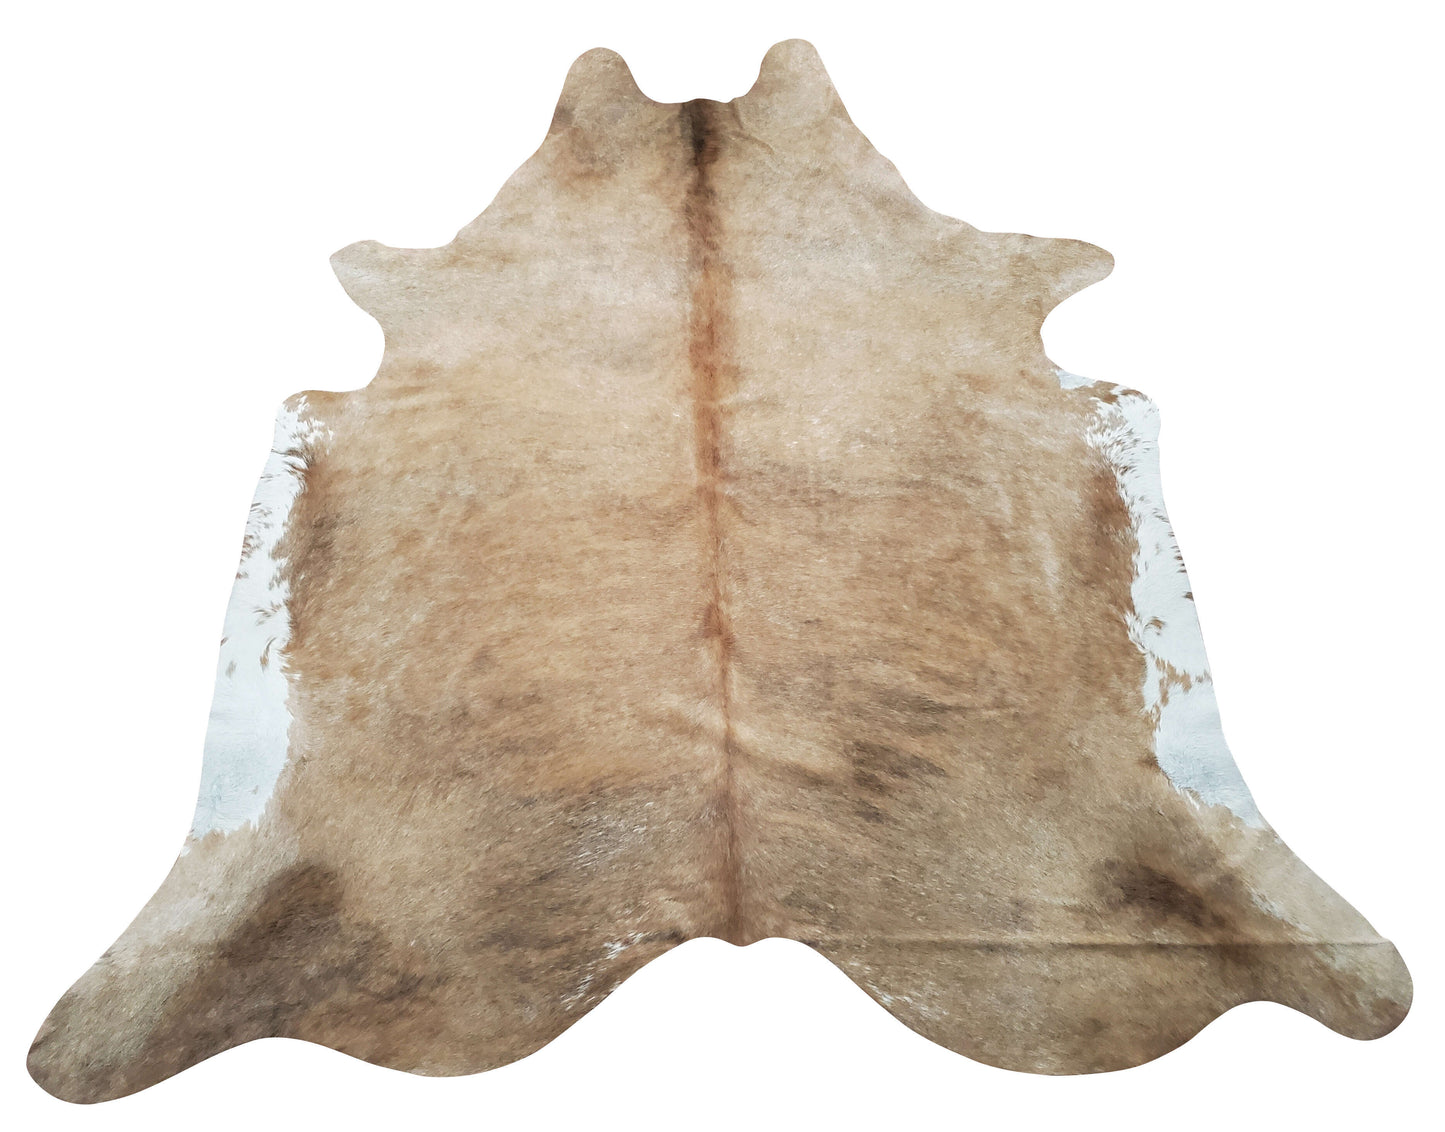 This beige cowhide rug is beautiful and very high quality looking! I get lots of compliments, this is perfect for any living room. 